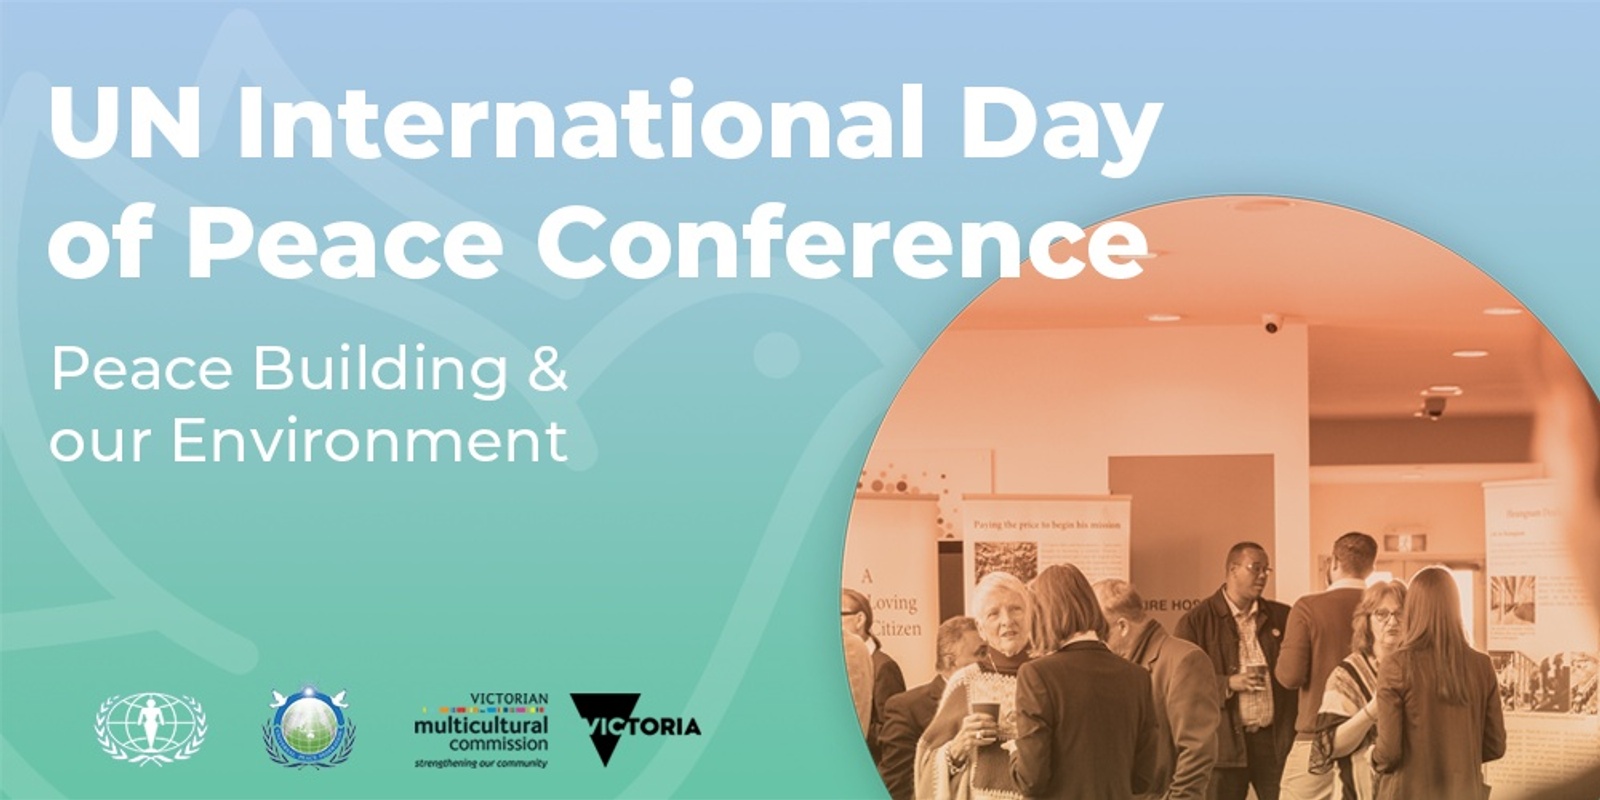 Banner image for UN International Day of Peace Conference 2019